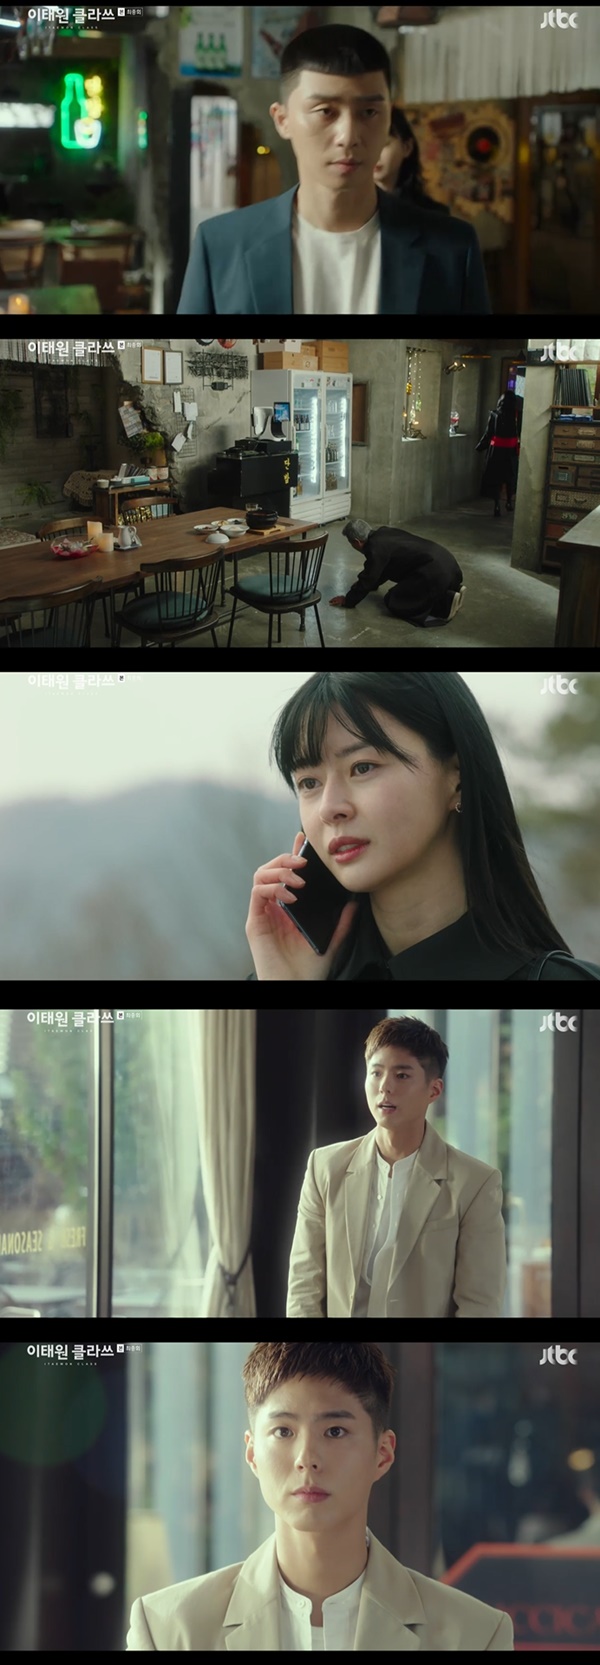 <p> Itaewon then write Park Seo-joon and Kim Dae-mi, both the Happiness as the ending was.</p><p>21 broadcast JTBC gold store drama, Itaewon then write(a dimmer picture and directing Kim Sung Yoon)in the box new, and this(Park Seo-joon)the source(security)is kidnapped by Jang Geun-Soo(Kim Dong-hee), Zoe(the Kim Dae-mi), for long Hee(YouTube name)to the to his knees.</p><p>This day long we and cold days in the knees because. Eventually lost belief is the axiom. Now feel how am I; and was delighted. On this night new, is inviting. I am in this fight for decades within worth and thought. Such a man is a hostage in the knees as I had. This ugly old man after uncovering a time inviting,he said. So long we are shocked in the heavens, and idly box new this looked at. The night new, and that ten years and you know you did,said his outing.</p><p>They kidnapped knotweed and Joey once again was in their hands. Joey from quivering hand weapons, heard the escape was successful, but the chase was. In moments of crisis box new, car drag appeared. This piece is in the box new to here is where I came because,said the bruises were. This latest winning ticket(kind of water)is to sacrifice himself and in the and night to new, to spent.</p><p>This night on the new screwed in for us on this from the jump, when I was last in. My head, my heart is so full,he confessed. Then Joey said, okay, right Ihe asked. Then, in the box new, and that you this mind was because. To be shaky. Love. A lot of loveand hearts and joy in him.</p><p>Presently Joey of the police report as source arrested at the end was. In the hospital, her eyes a sigh of relief to rest, and once again Joey to hug. Since the device is a gangster and the adhesion of relationships, murder, kidnapping, embezzlement, bribery, irregularities, such as suspicion of Procuratorate investigation and did not know said.</p><p>Since the Extraordinary Shareholders  Meeting in the new device group to the New Prosperity how aspirations, revealing and executives of the applause received.</p><p>Ahead night new for this Chapter of the group to the accusation that was coming out(the right one) is also a happy ending as the finish. Coming out that night new, and in I now feel comfortable in my real life to live. As a friend to cheer for. One favor only do I want to. Happiness is to live forward,said hung up the phone. Since knotweed water at all and after study in the United States to the left.</p><p>Since Park Bo-gum, this surprise appeared to the viewers that took me by surprise. A new interview came around after the news, Park Bo-gum to the water to find jackpotthis is admiration you receive and the Happiness as the ending was.</p>